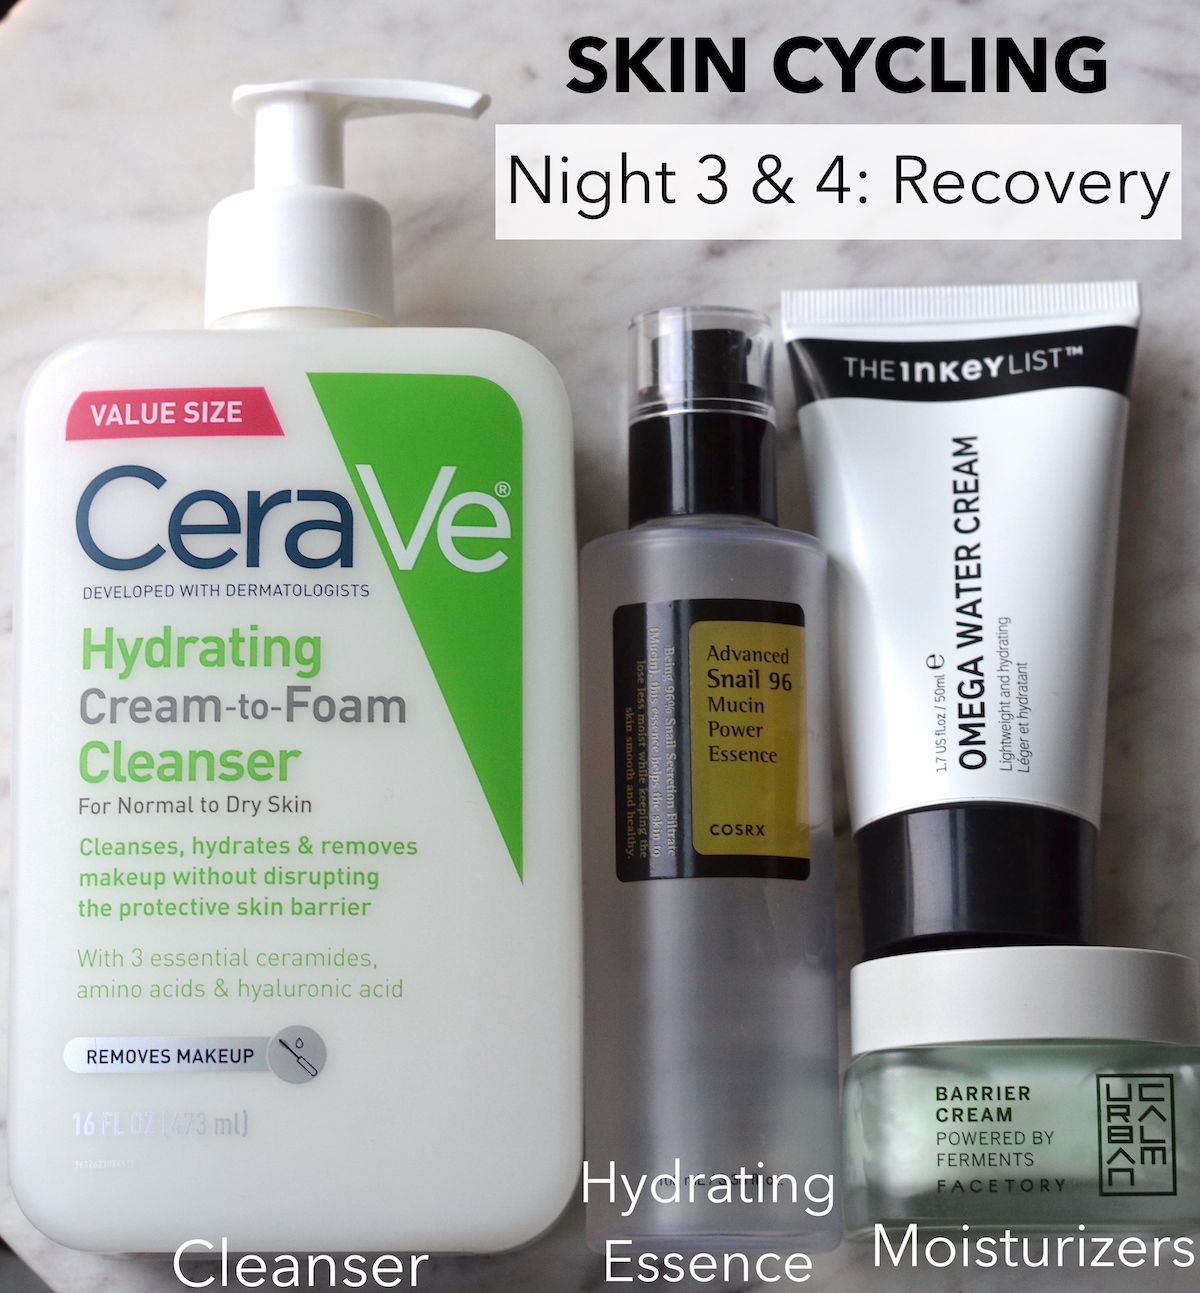 Skin cycling routine recovery night 3 and 4